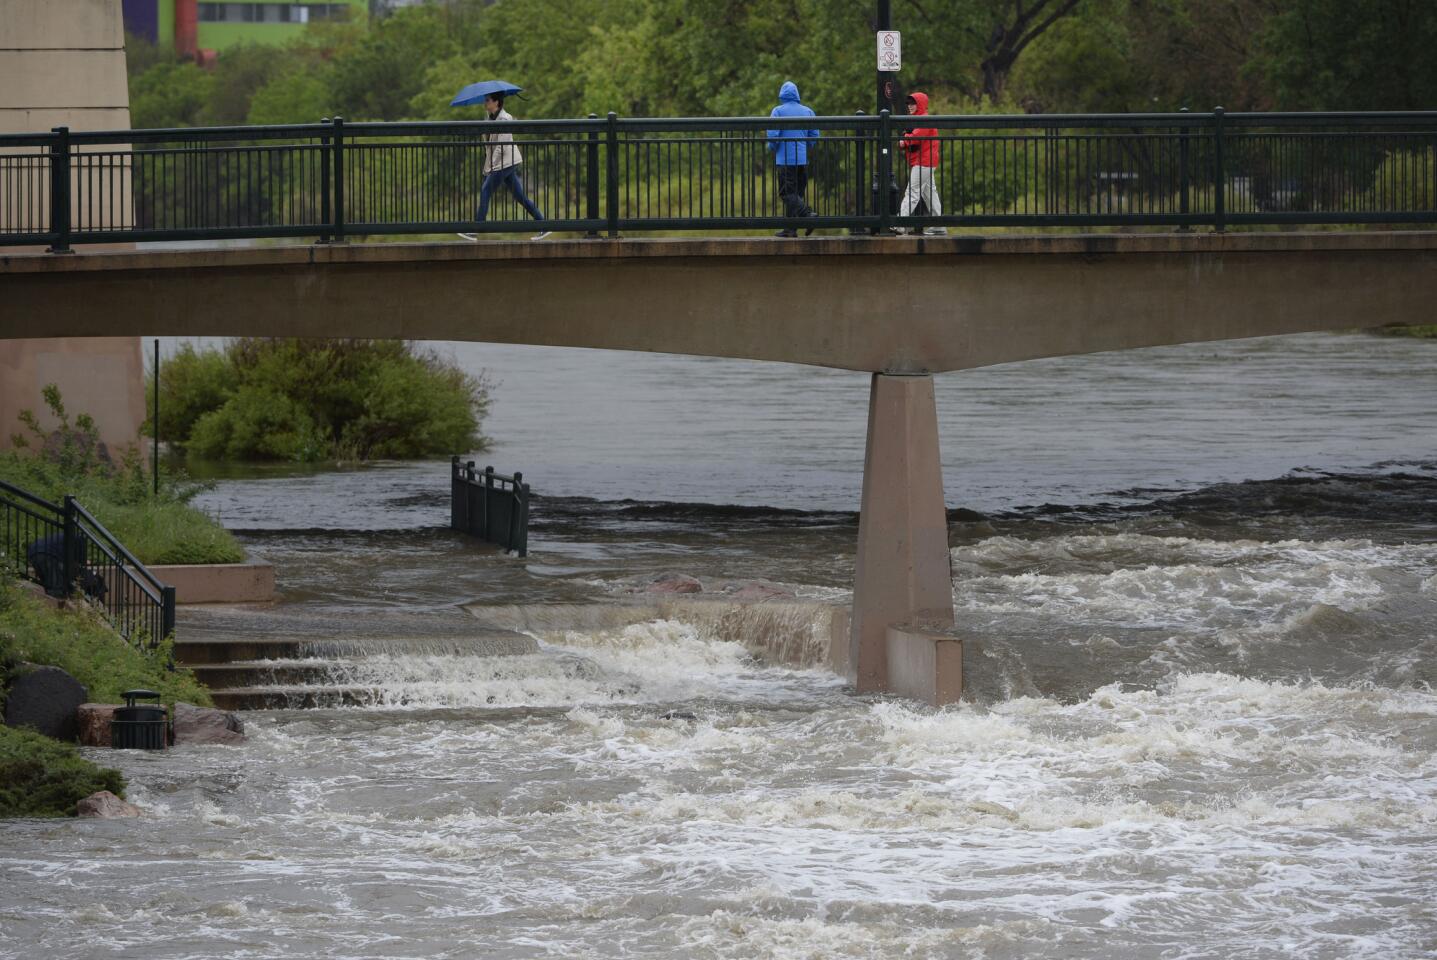 The South Platte spills over onto a walking path underneath the bridge during a heavy rain storm at Confluence Park in Denver.